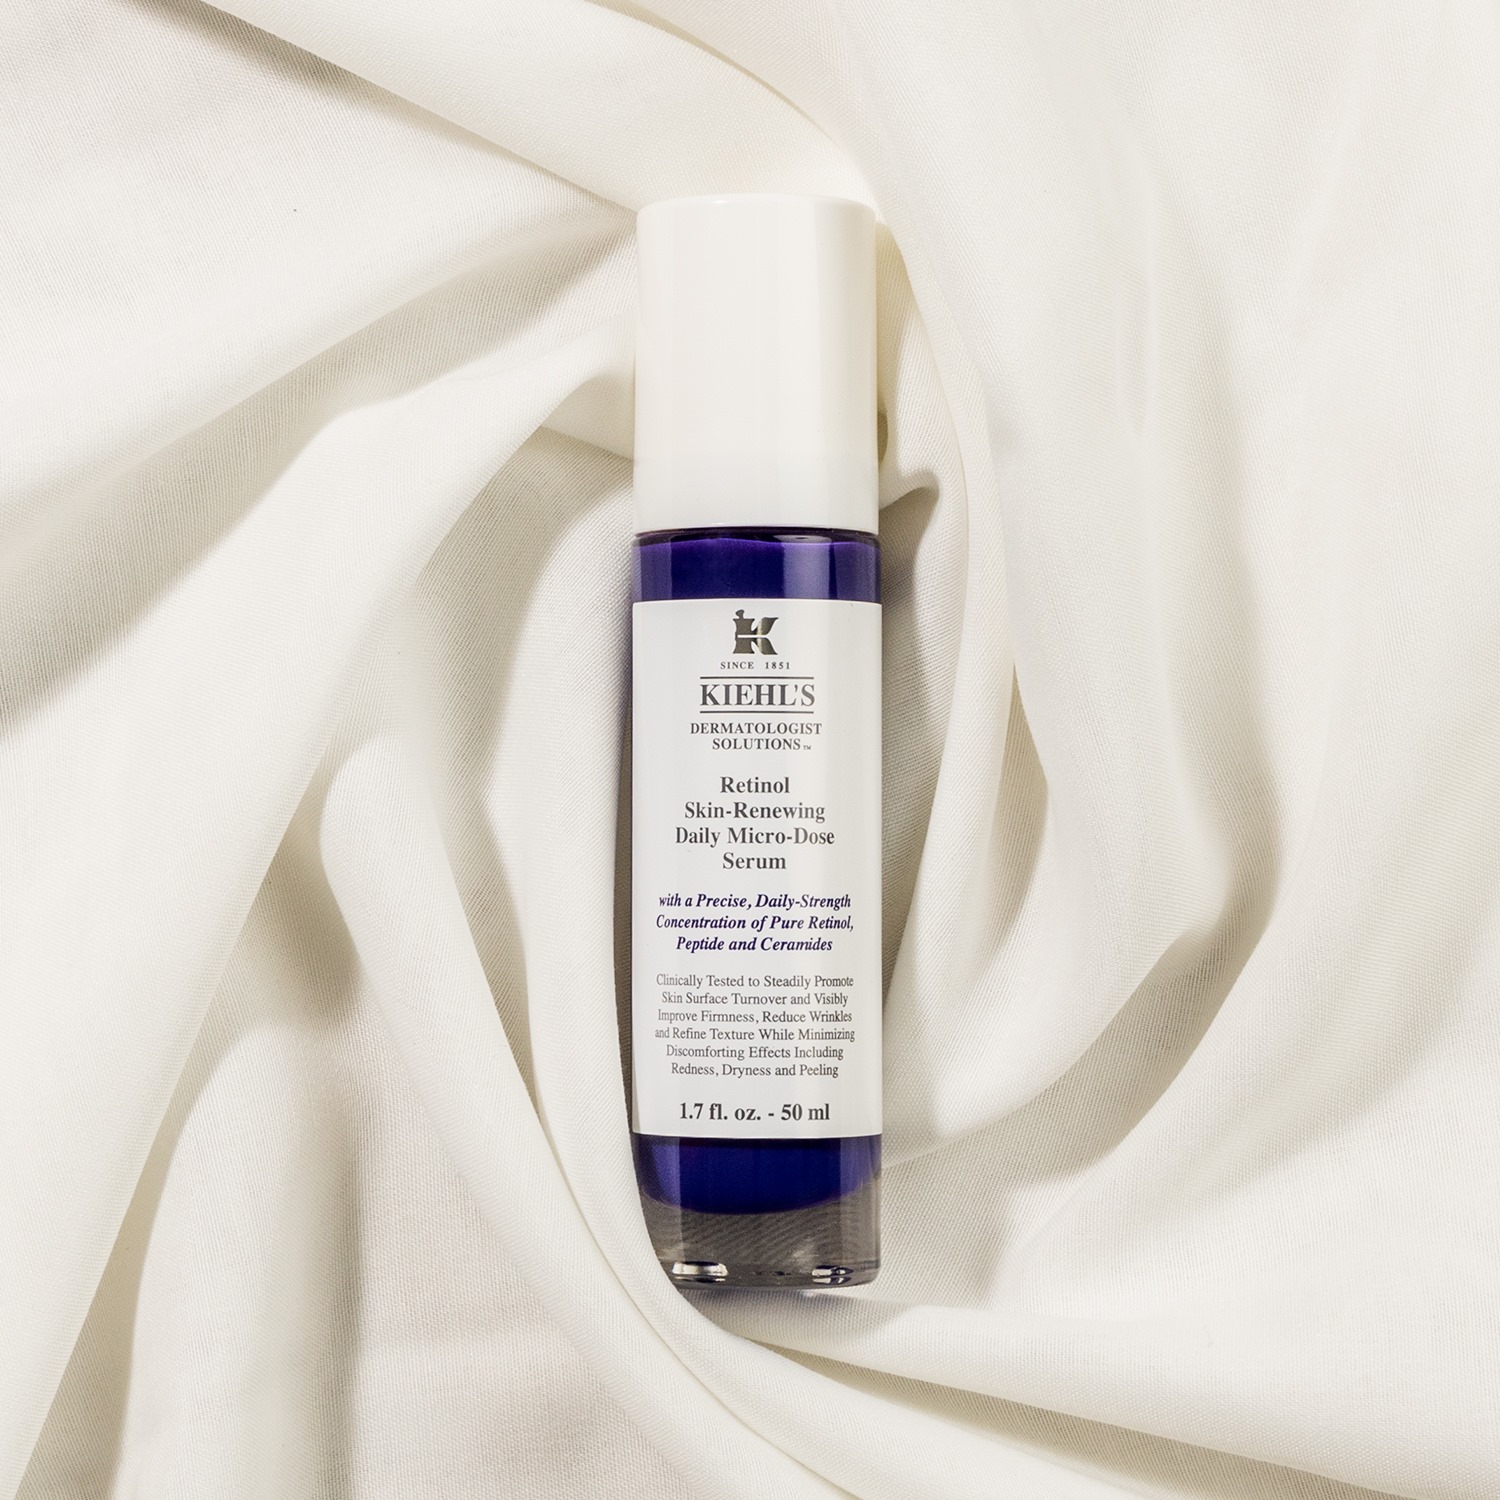 You Can Now Shop Kiehl’s Best-Selling Retinol Daily Micro-Dose Serum on Shopee